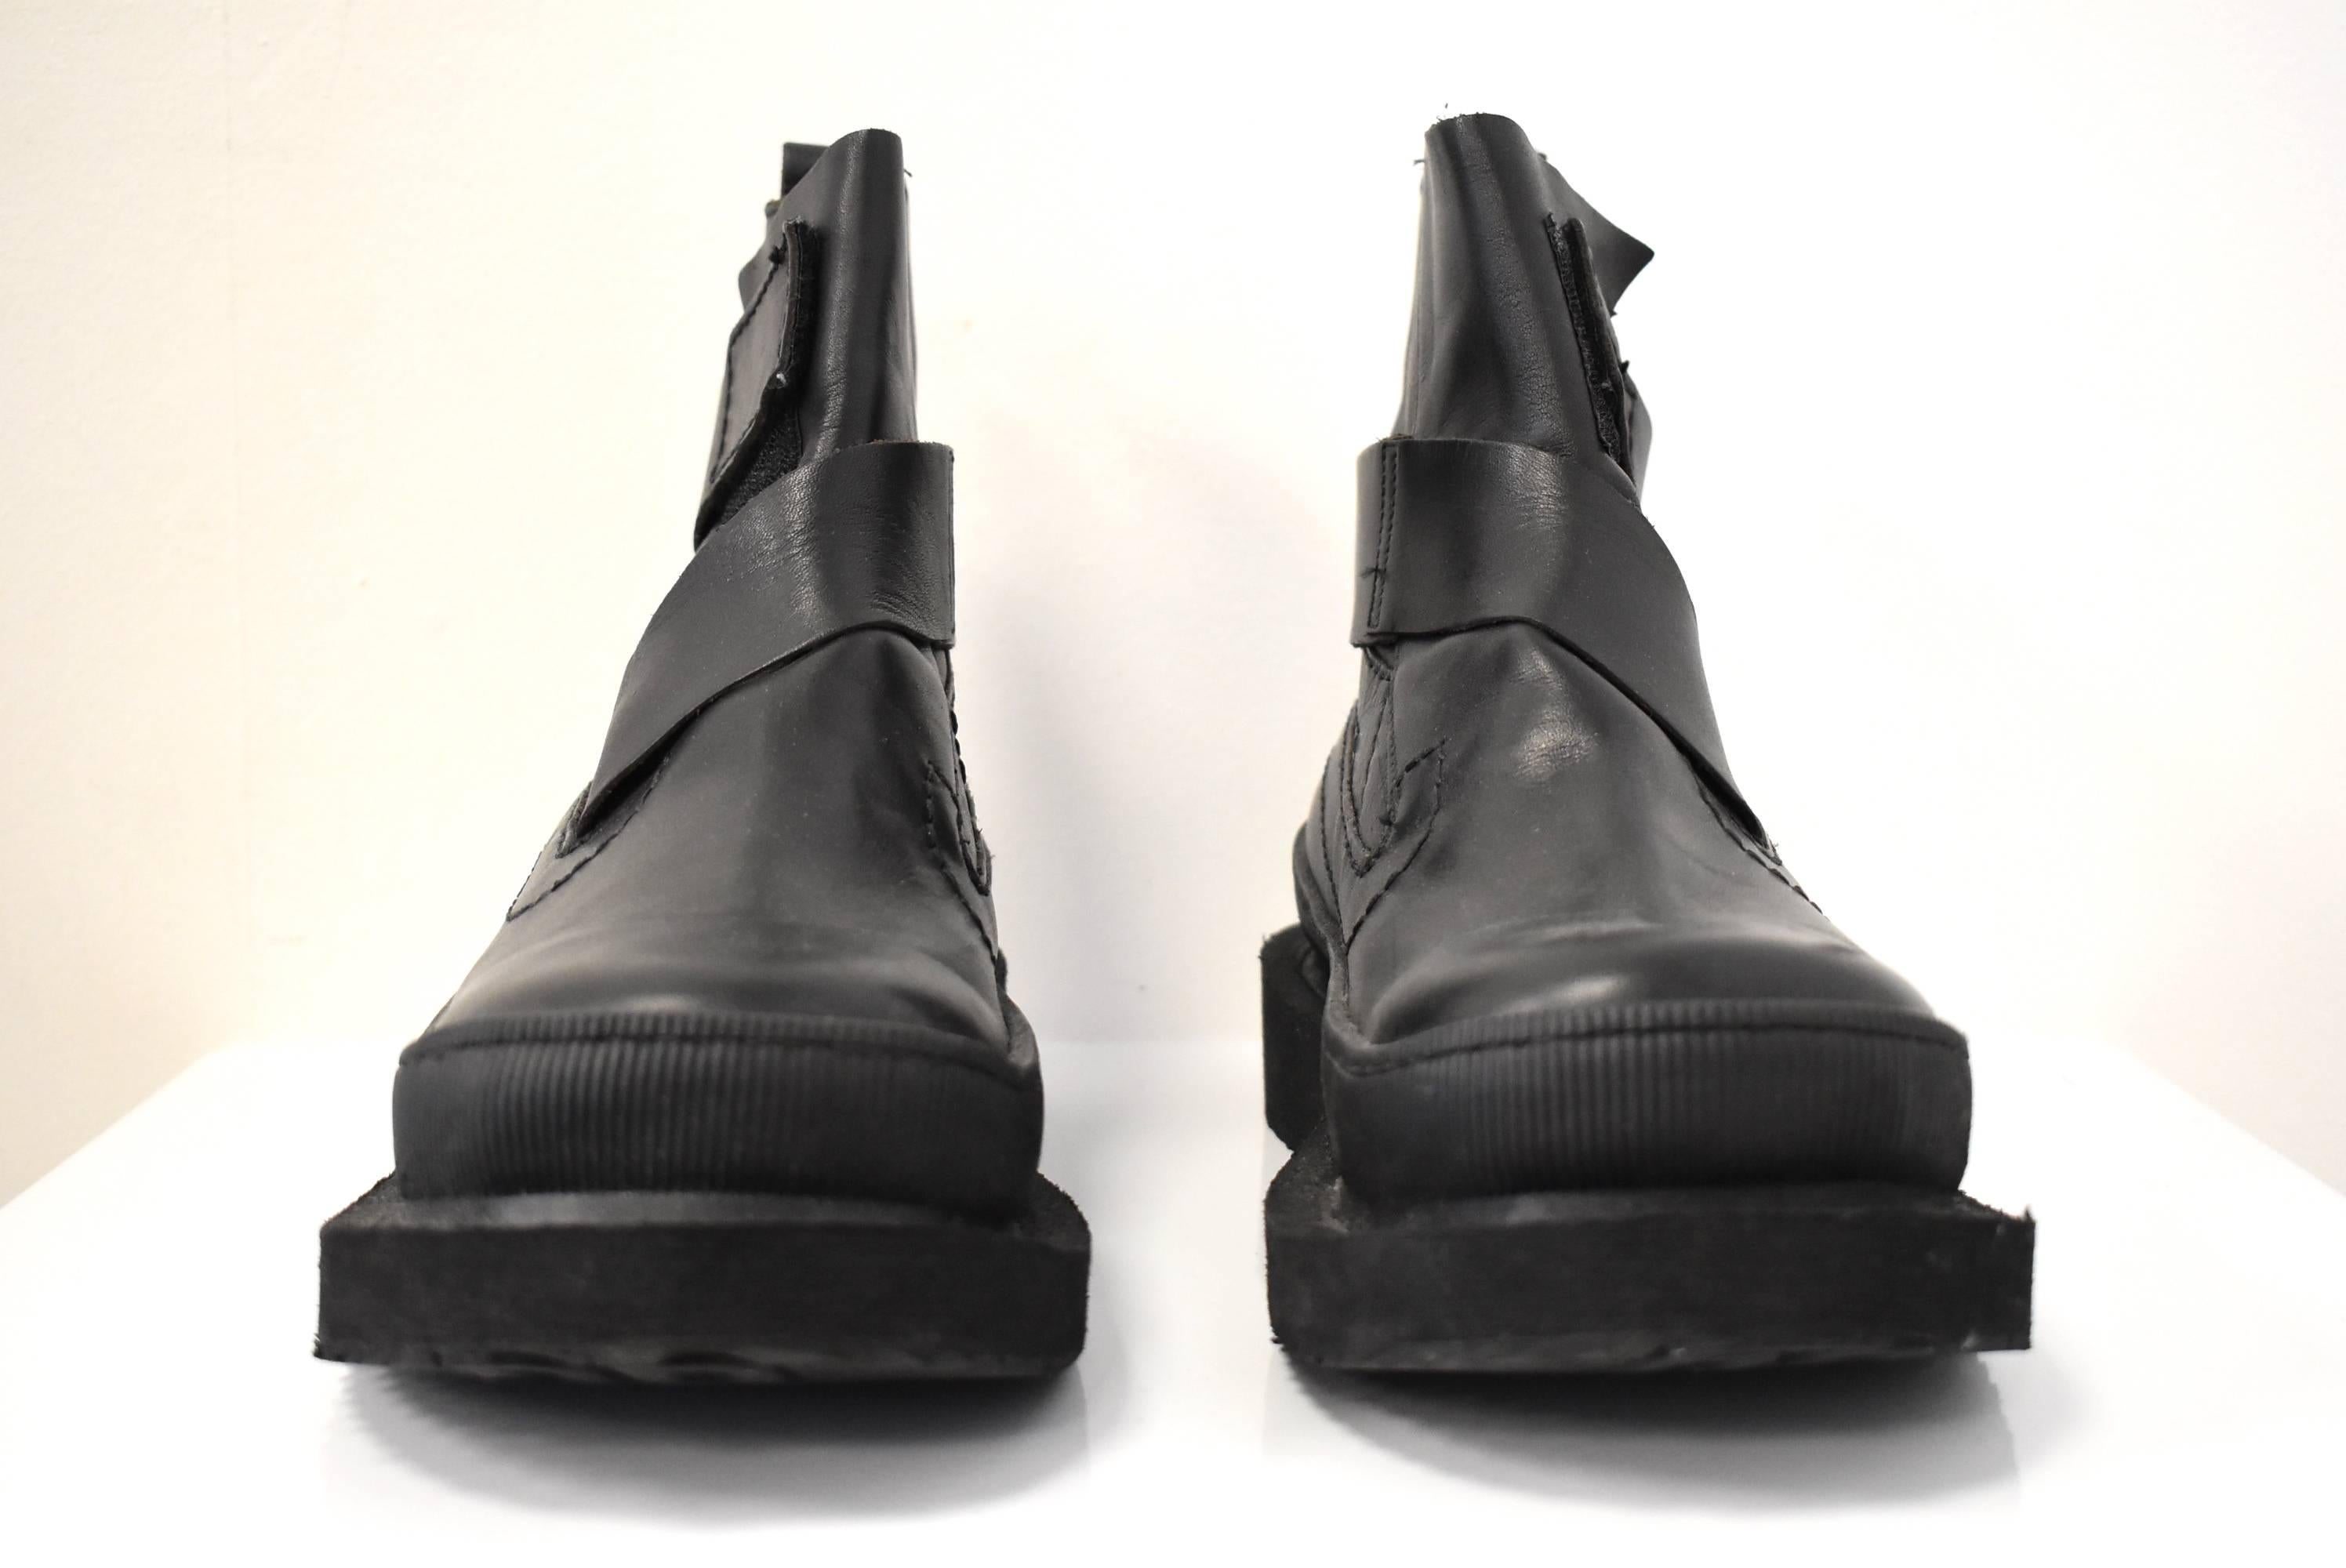 A pair of virtually unworn black leather pull-on boots by Dirk Bikkembergs. The boots have a wrap-around strap that velcros at the top of the boot. 
The chunky boots have a slight 1.5 inch heel to give extra height. Despite their thickness, the